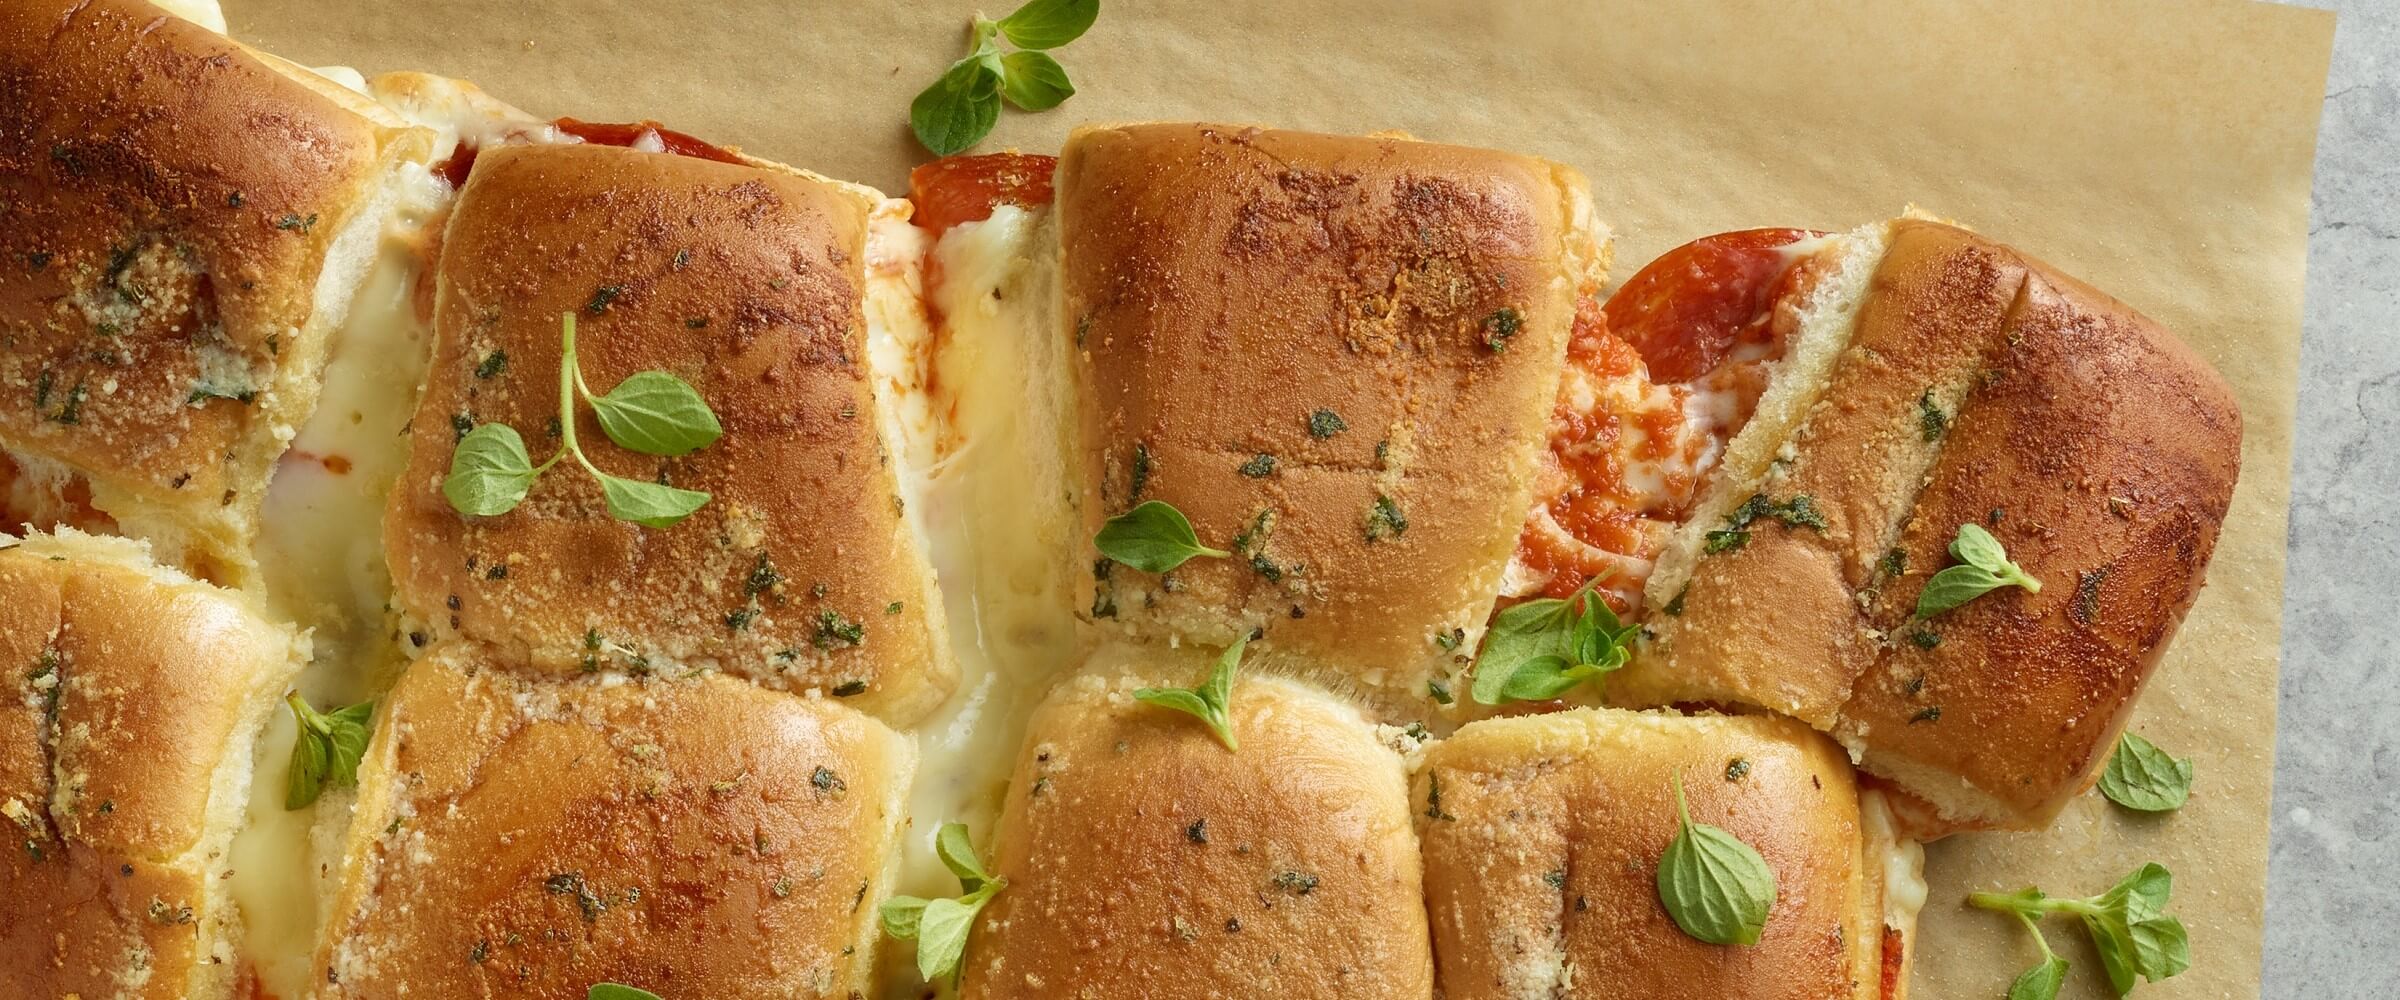 pull apart pizza sandwiches topped with garnish on parchment paper